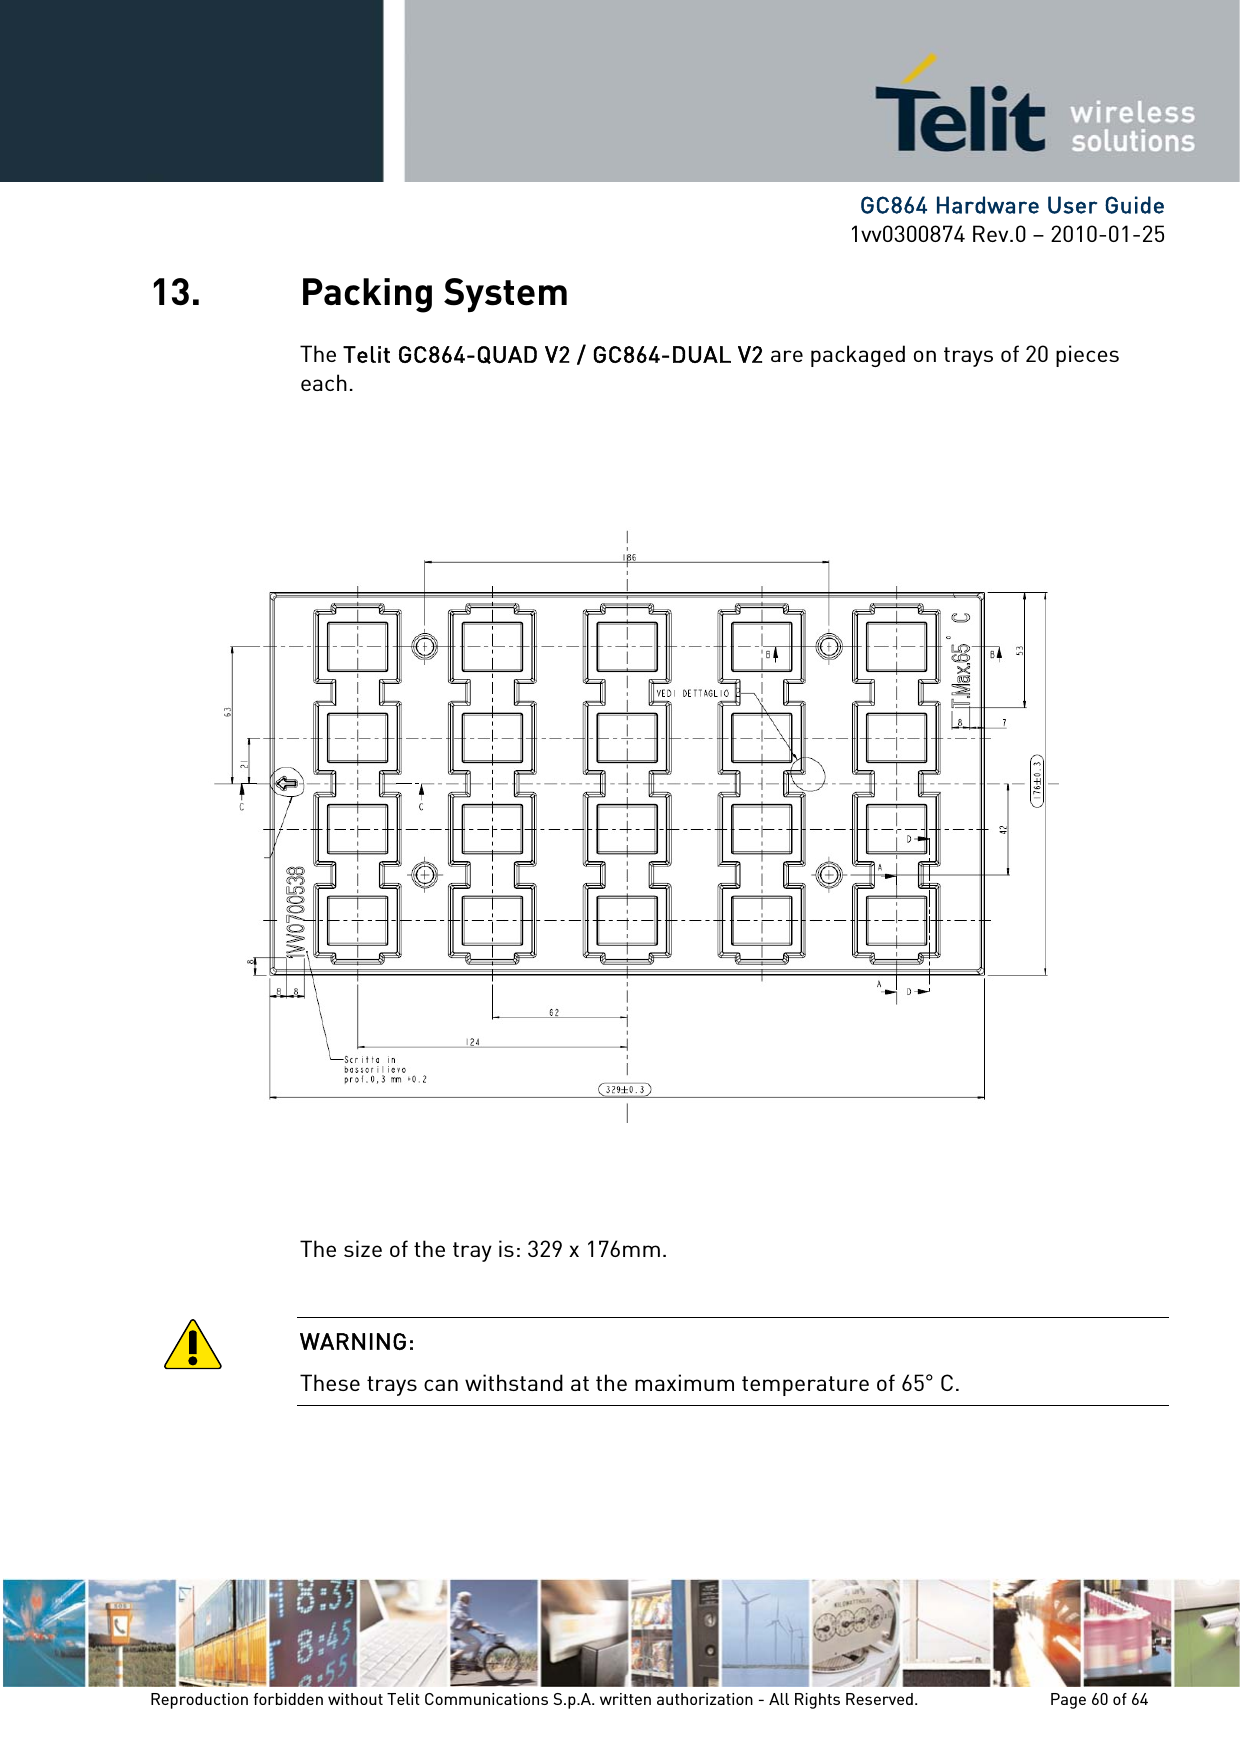      GC864 Hardware User Guide 1vv0300874 Rev.0 – 2010-01-25 Reproduction forbidden without Telit Communications S.p.A. written authorization - All Rights Reserved.    Page 60 of 64  13. Packing System The Telit GC864-QUAD V2 / GC864-DUAL V2 are packaged on trays of 20 pieces each.                     The size of the tray is: 329 x 176mm.  WARNING: These trays can withstand at the maximum temperature of 65° C. 